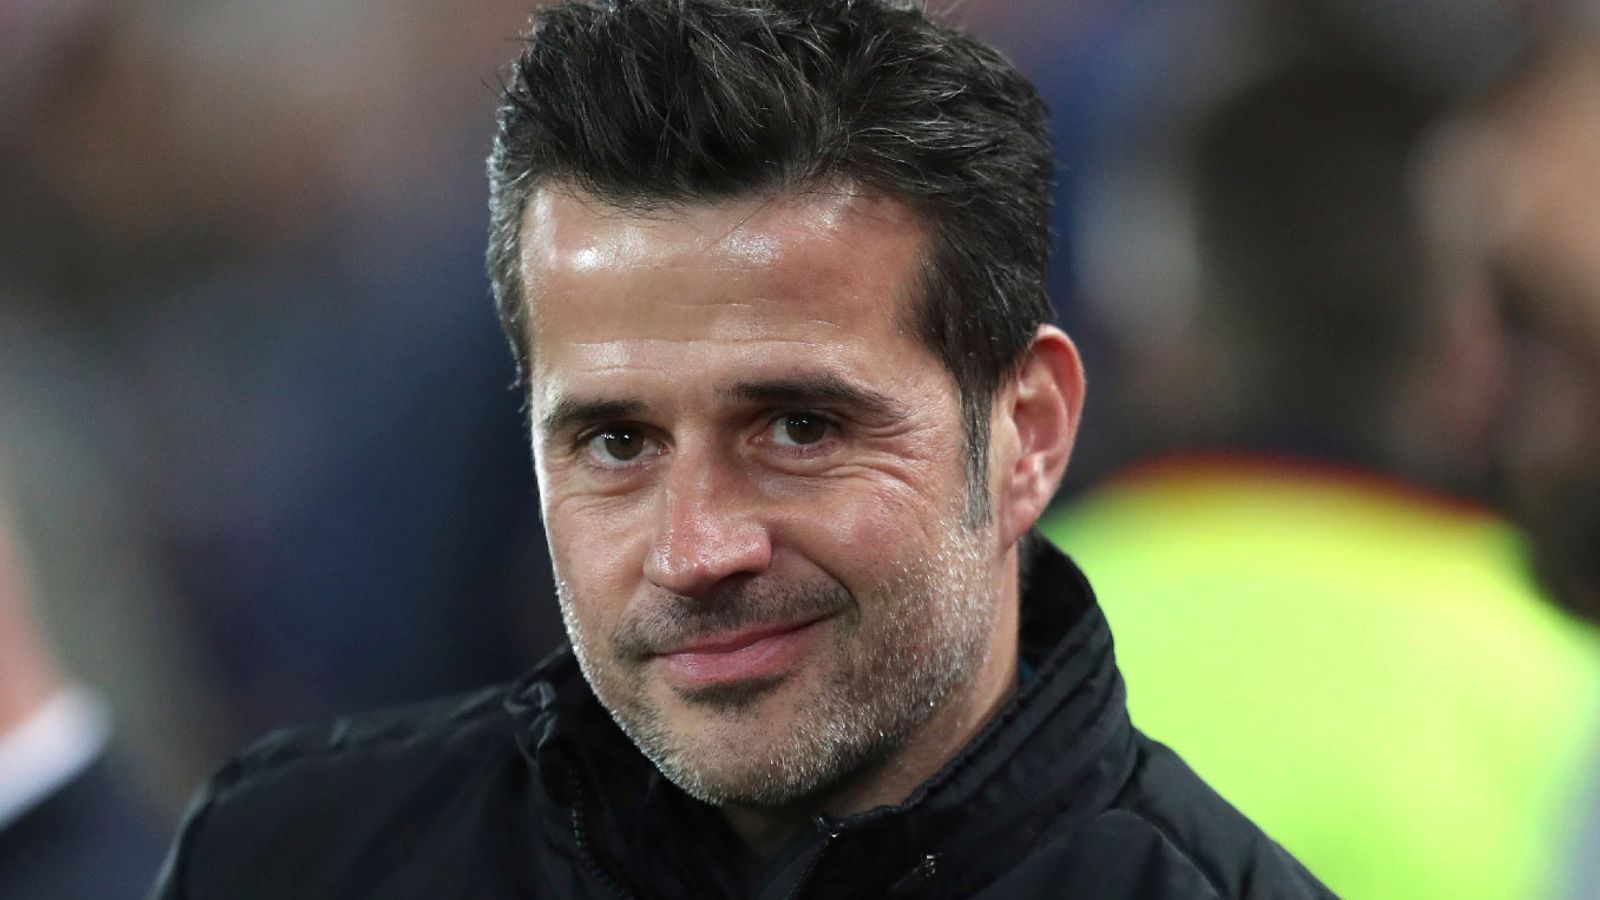 Fulham appoint Marco Silva as head coach on three-year contract